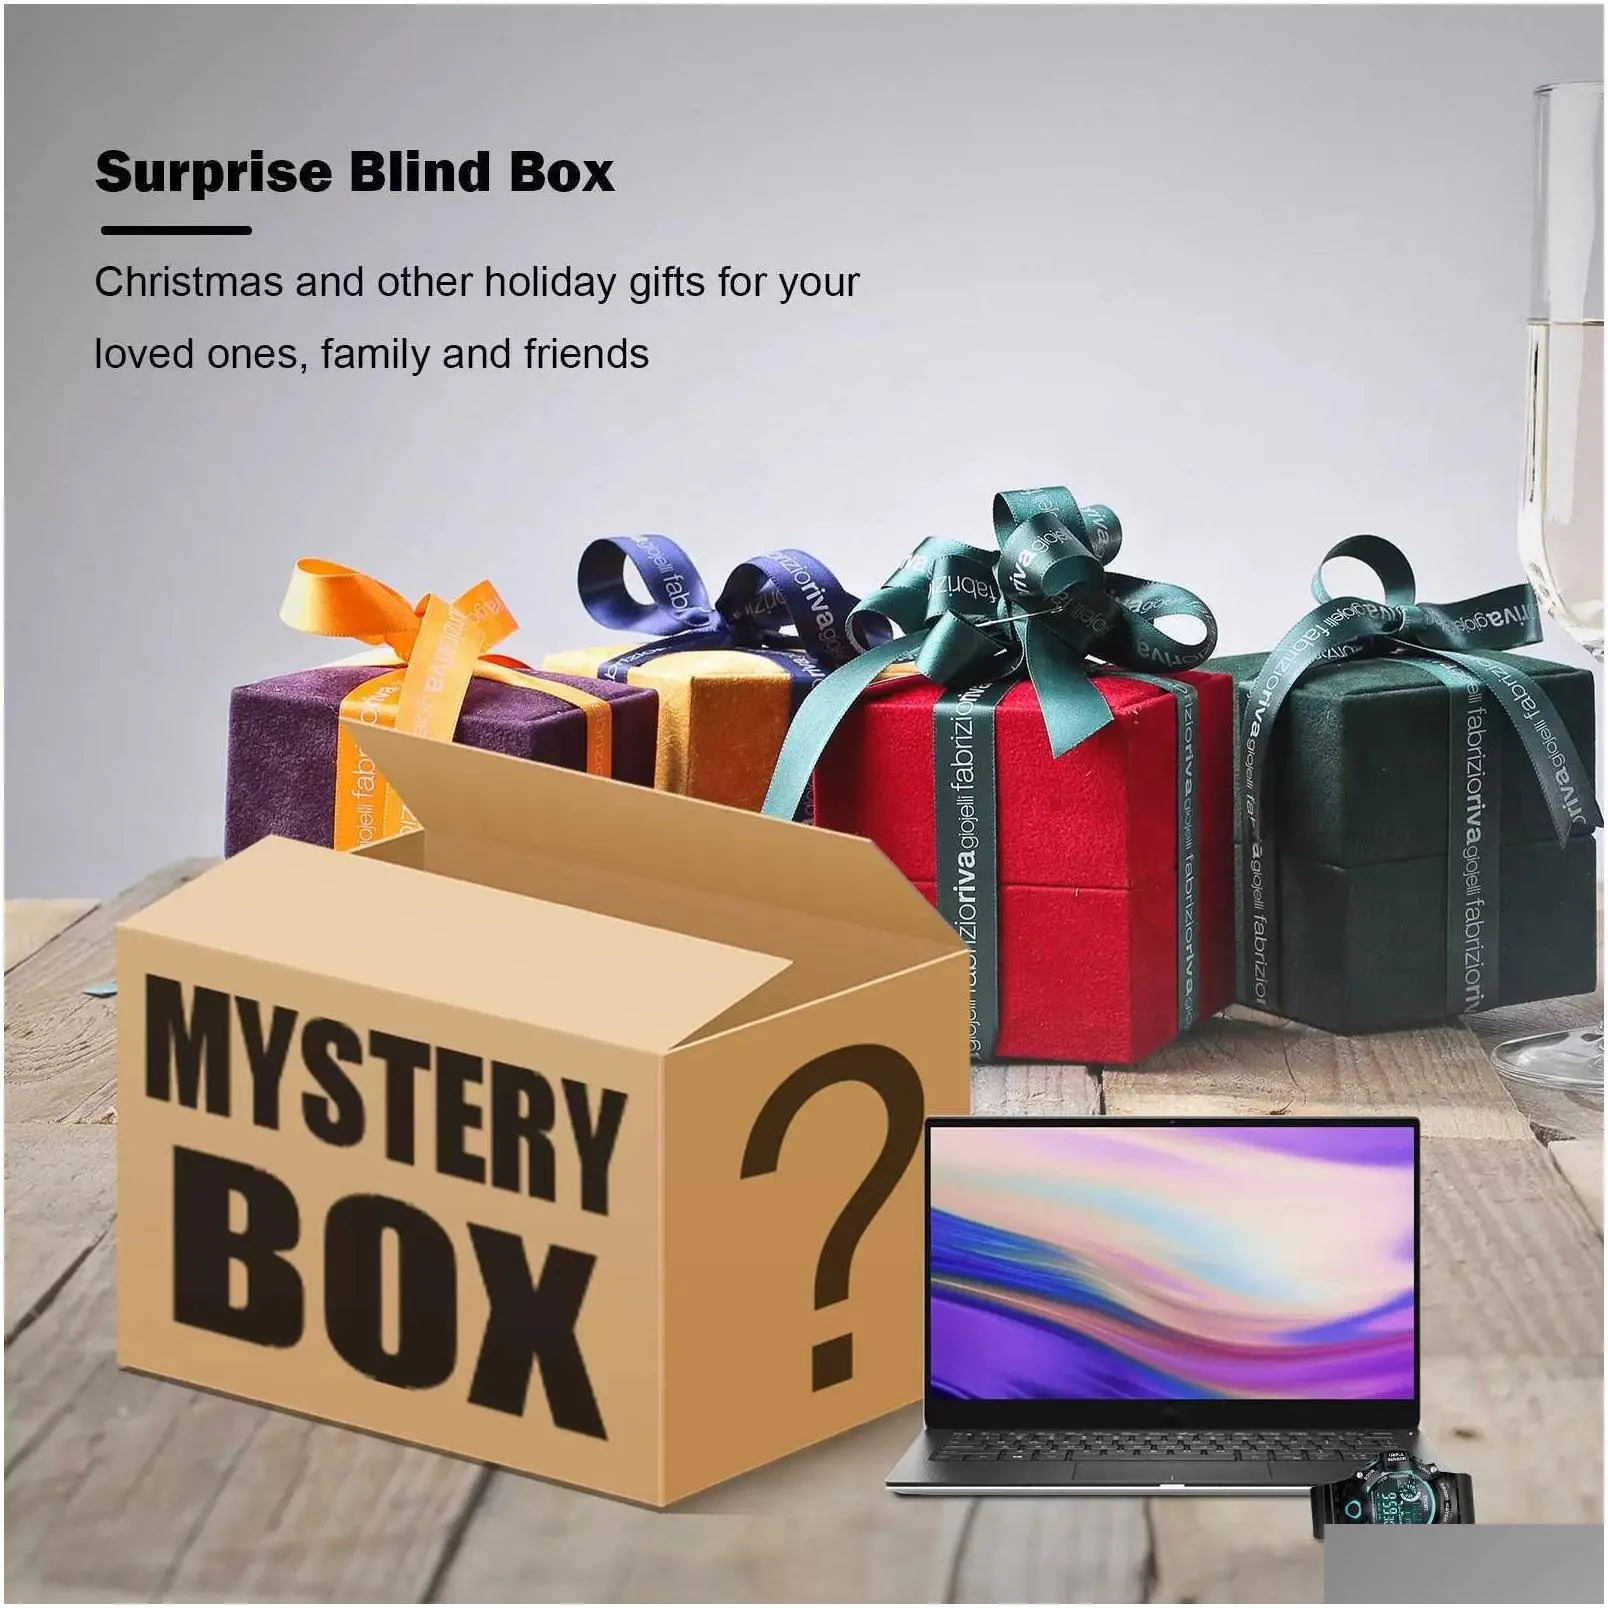 2023 new lucky mystery box blind boxes appliances home item electronic style product such headsets smart watches surprise gif festive party